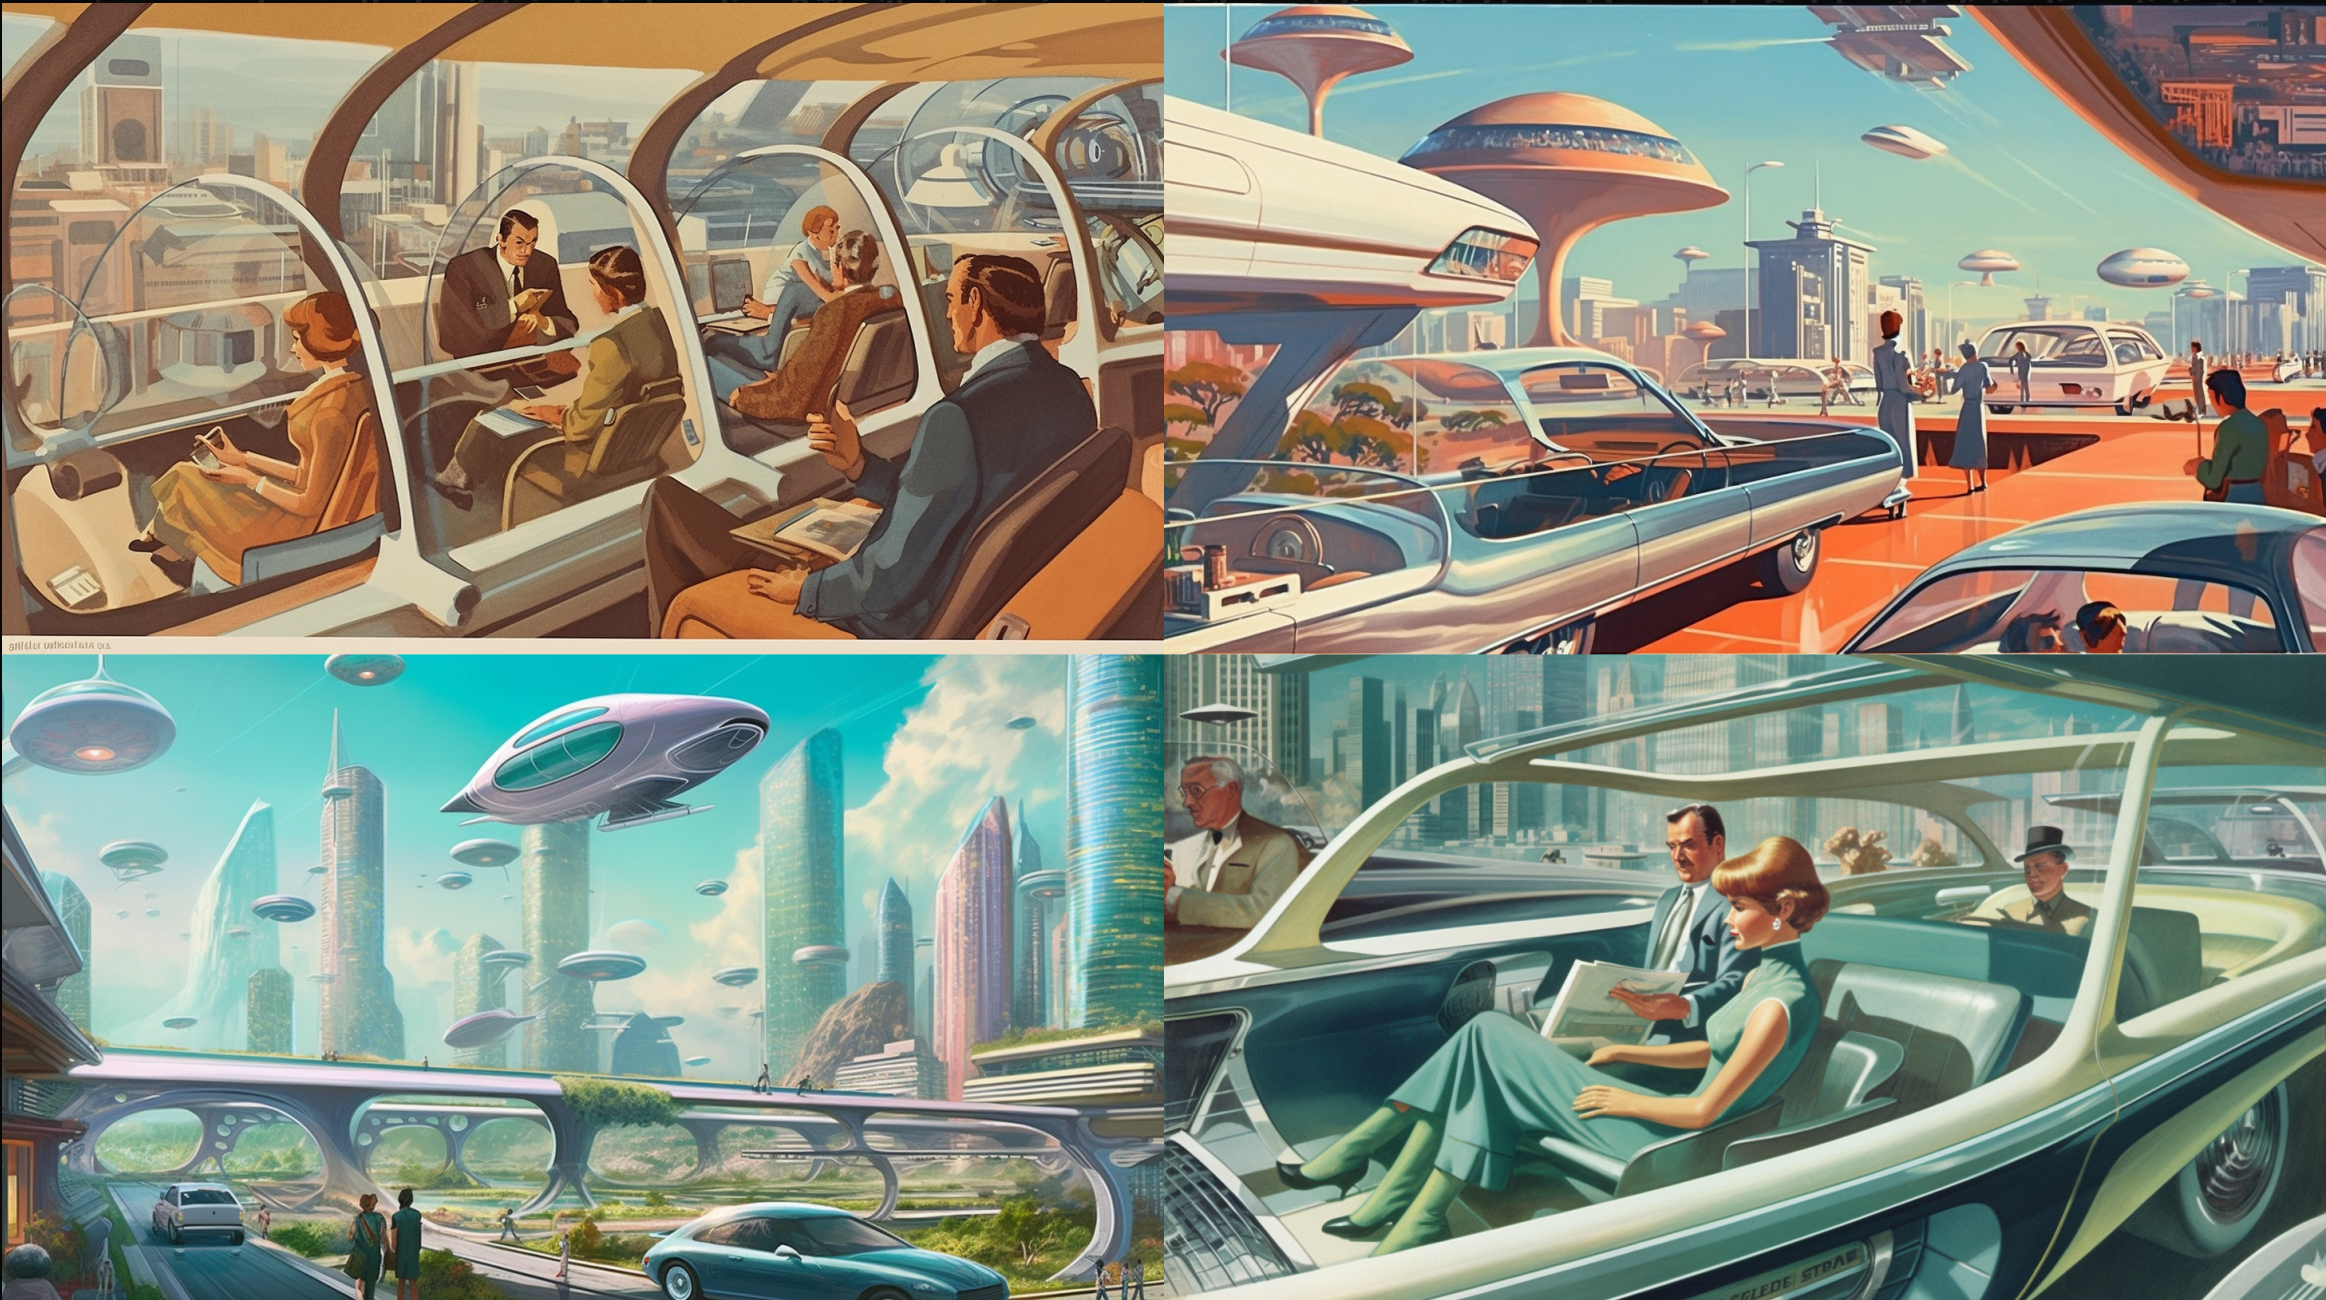 A captivating 1960s retrofuturistic panorama by Arthur Radebaugh4 featuring a happy family of four - a couple and their two children - immersed in a game as they enjoy a ride in their self driving aiutomobile5 The scene is captured from a high bird's-eye perspective, allowing the viewer to peer through the car's transparent glass roof and observe the family's joyful interaction2 The illustration is using a high-resolution digital format to emulate Radebaugh's distinctive artistic style and attention to detail. The color palette reflects the retrofuturistic theme, combining warm, nostalgic tones with vibrant hues that capture the sense of innovation and progress.  The self-driving car's design is sleek and streamlined, showcasing advanced technology and a spacious interior that provides ample room for the family to relax and engage in leisurely activities. The vehicle effortlessly navigates the highway that stretches out into the distance, winding its way through an imaginative cityscape of towering skyscrapers and avant-garde architecture In the background, the city's skyline and infrastructure evoke a sense of wonder and possibility, with subtle retrofuturistic elements that exemplify the era's optimistic vision of the future2 --ar 16:9